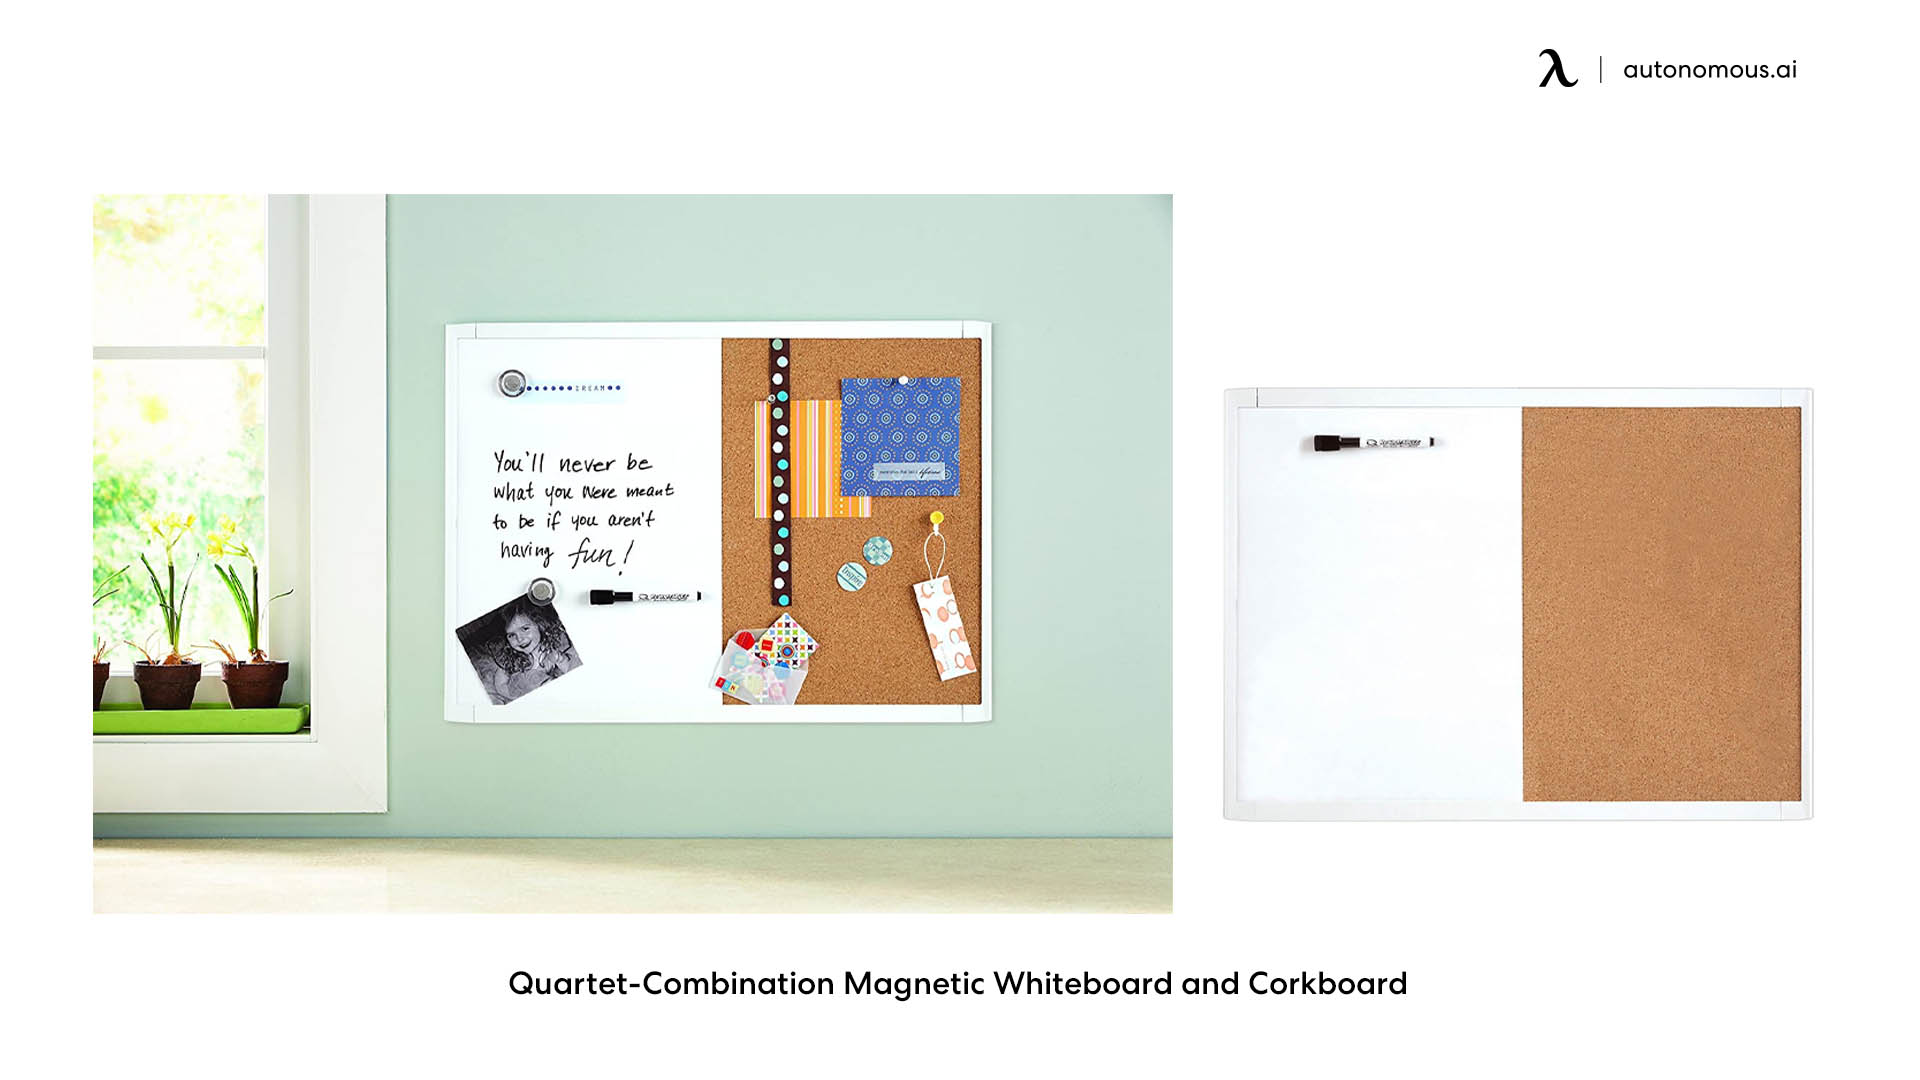 Quartet-Combination Magnetic Whiteboard and Corkboard